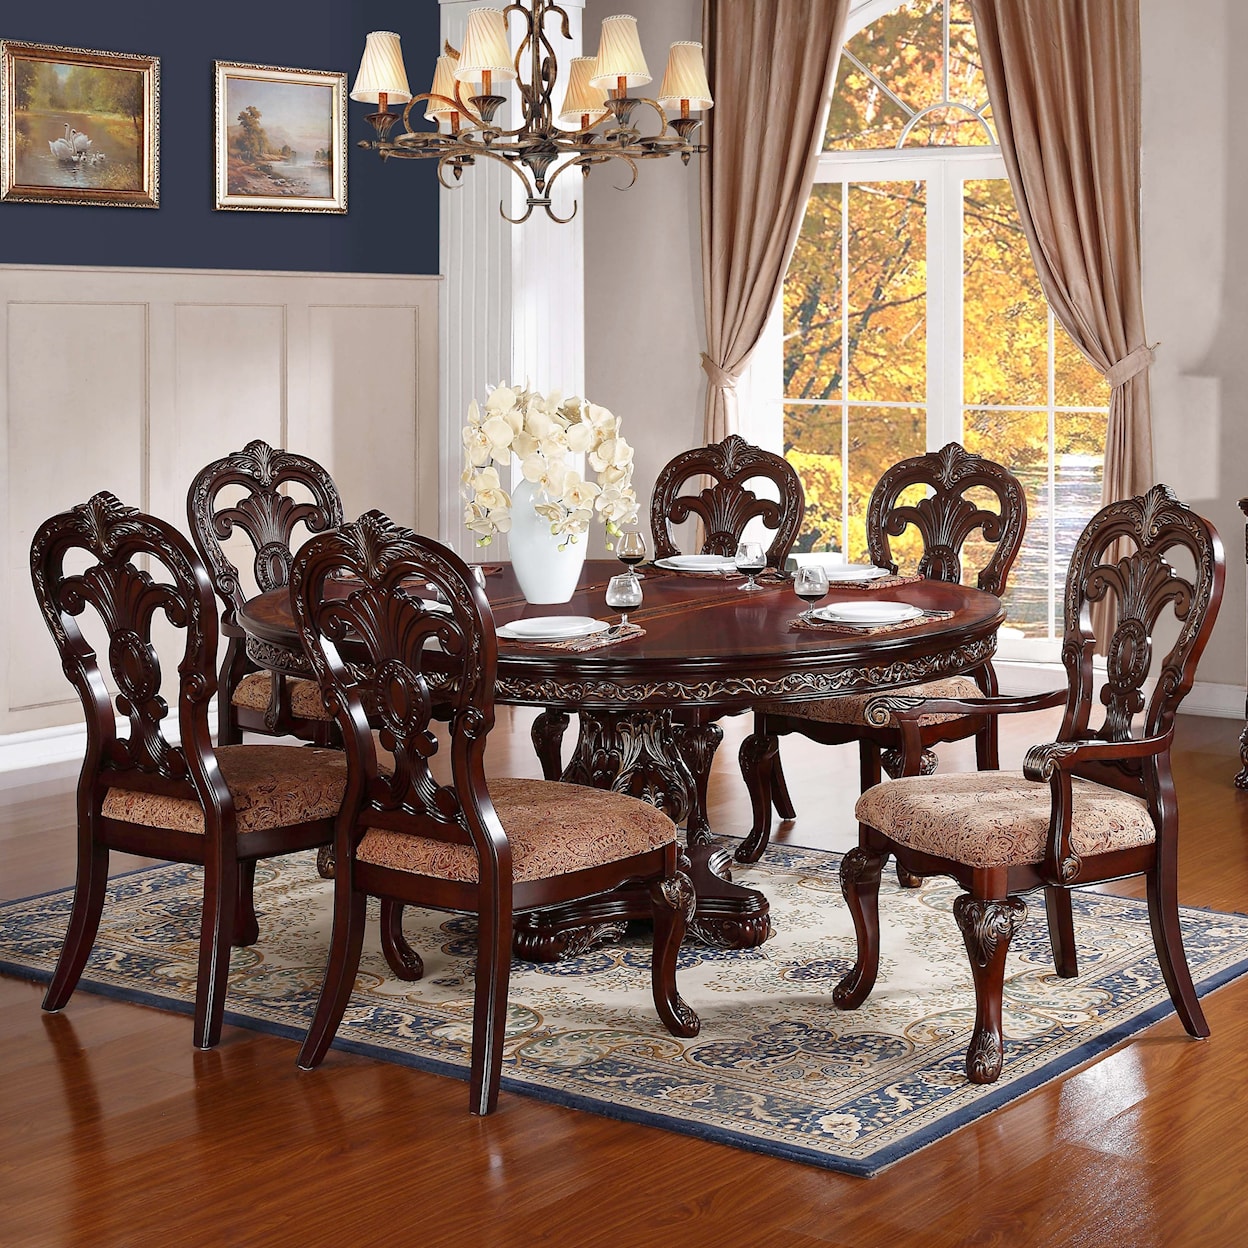 Homelegance Deryn Park Dining Table and Chair Set